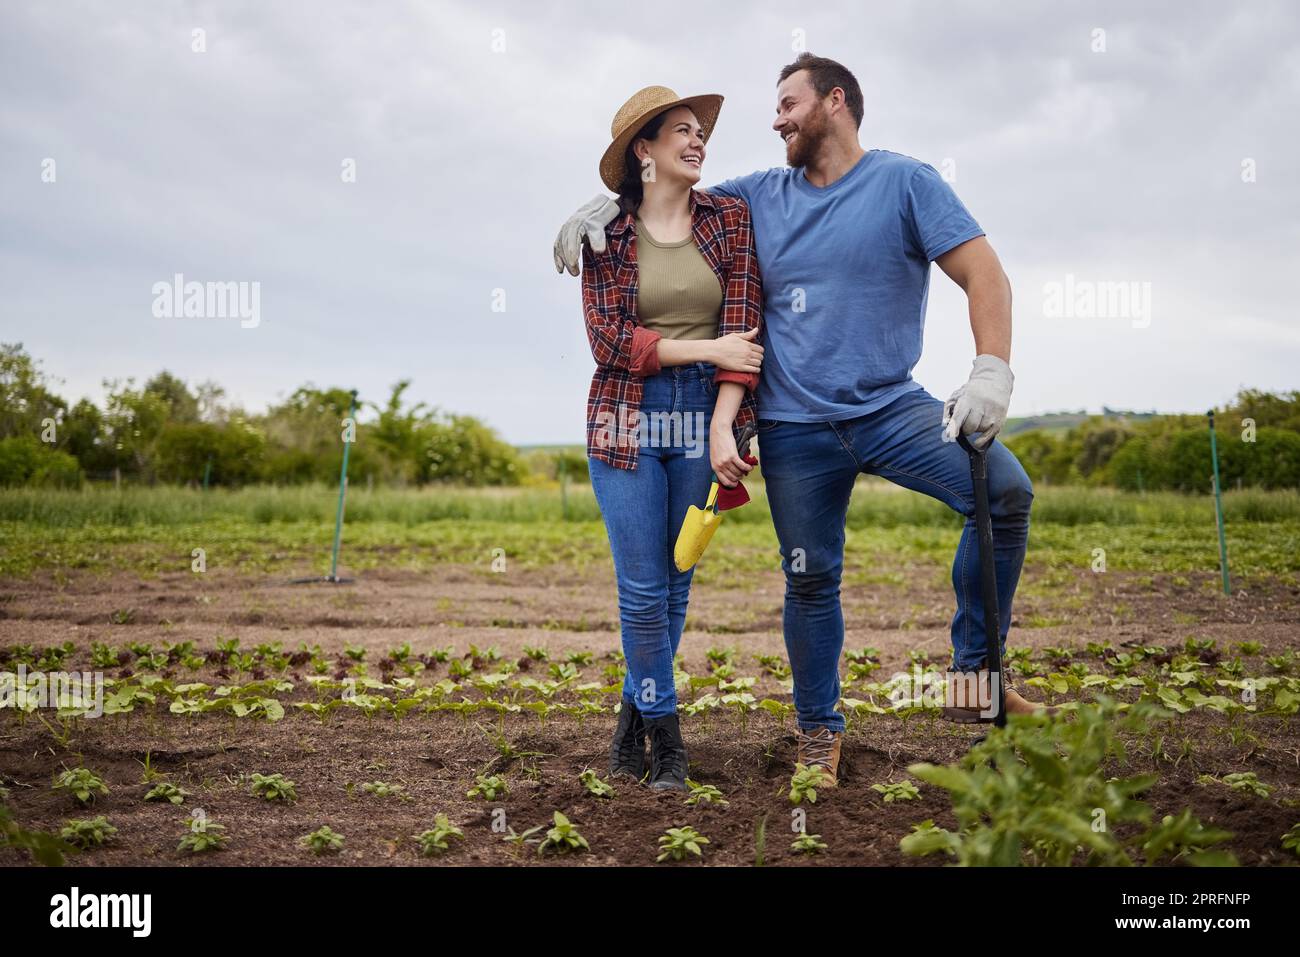 Startup, success and agriculture, couple work farm together. Sustainability, teamwork and small business of sustainable food production. Happy farmer, man and woman work in growth, love and farming. Stock Photo